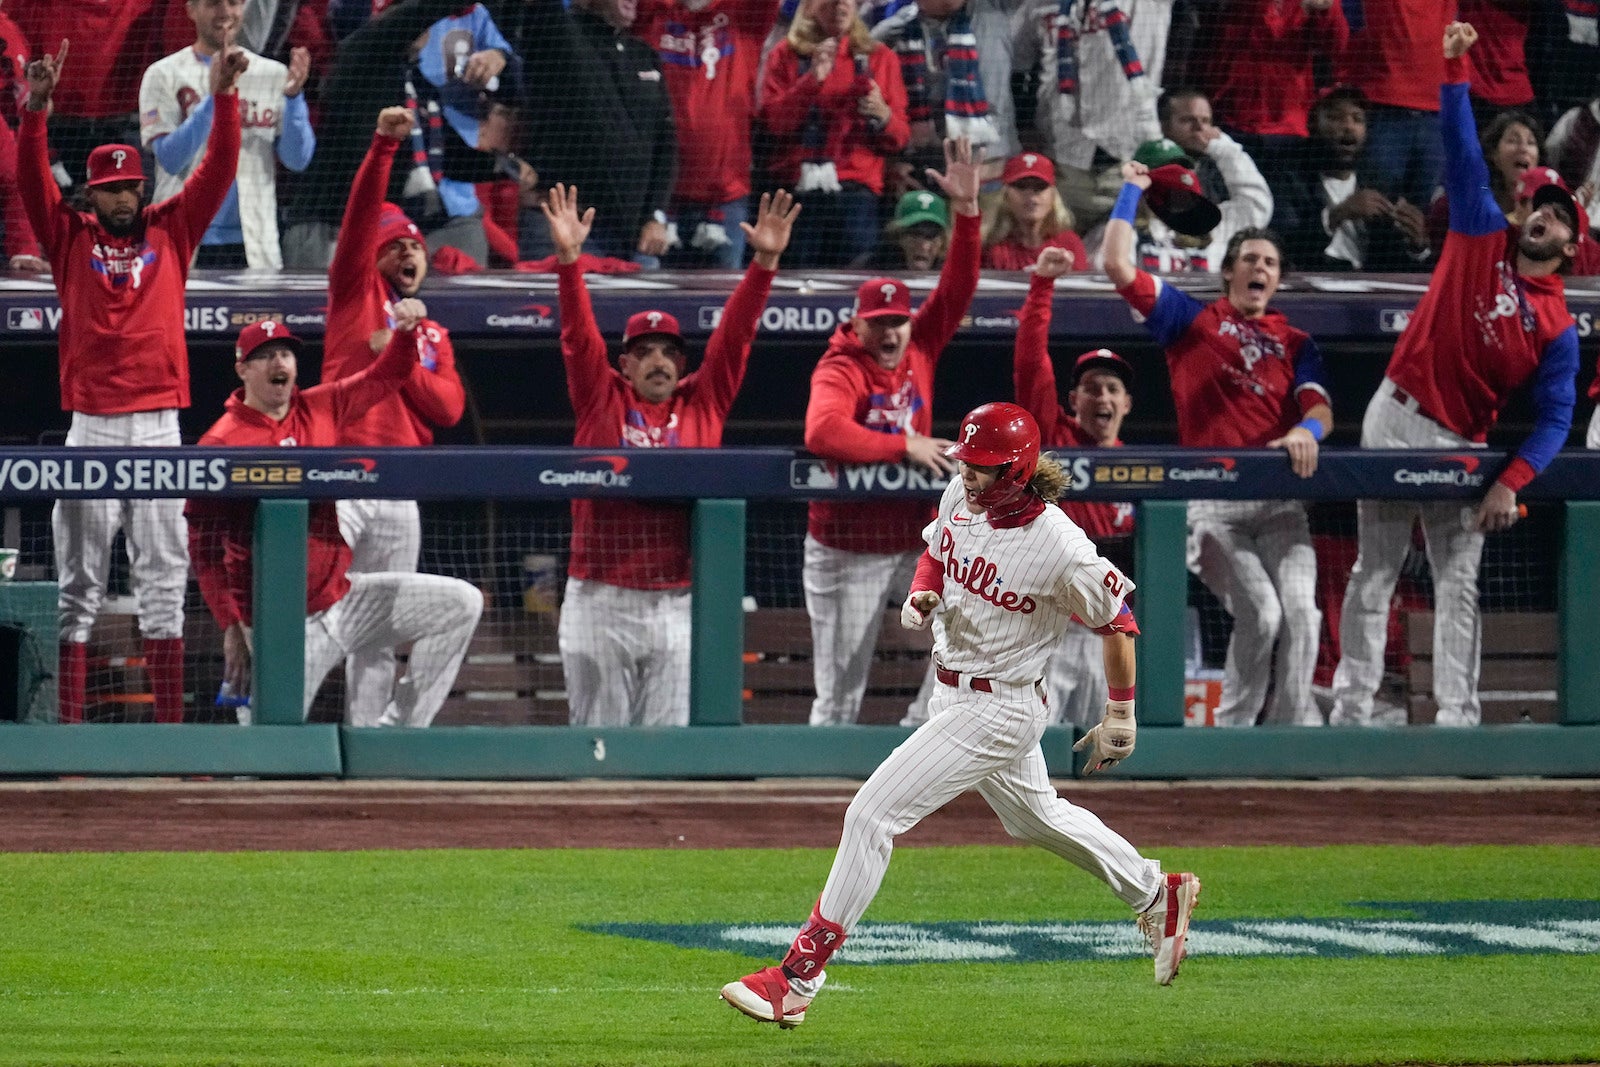 Phillies World Series Alec Bohm hits 1,000th HR, Phils launch 5 WHYY